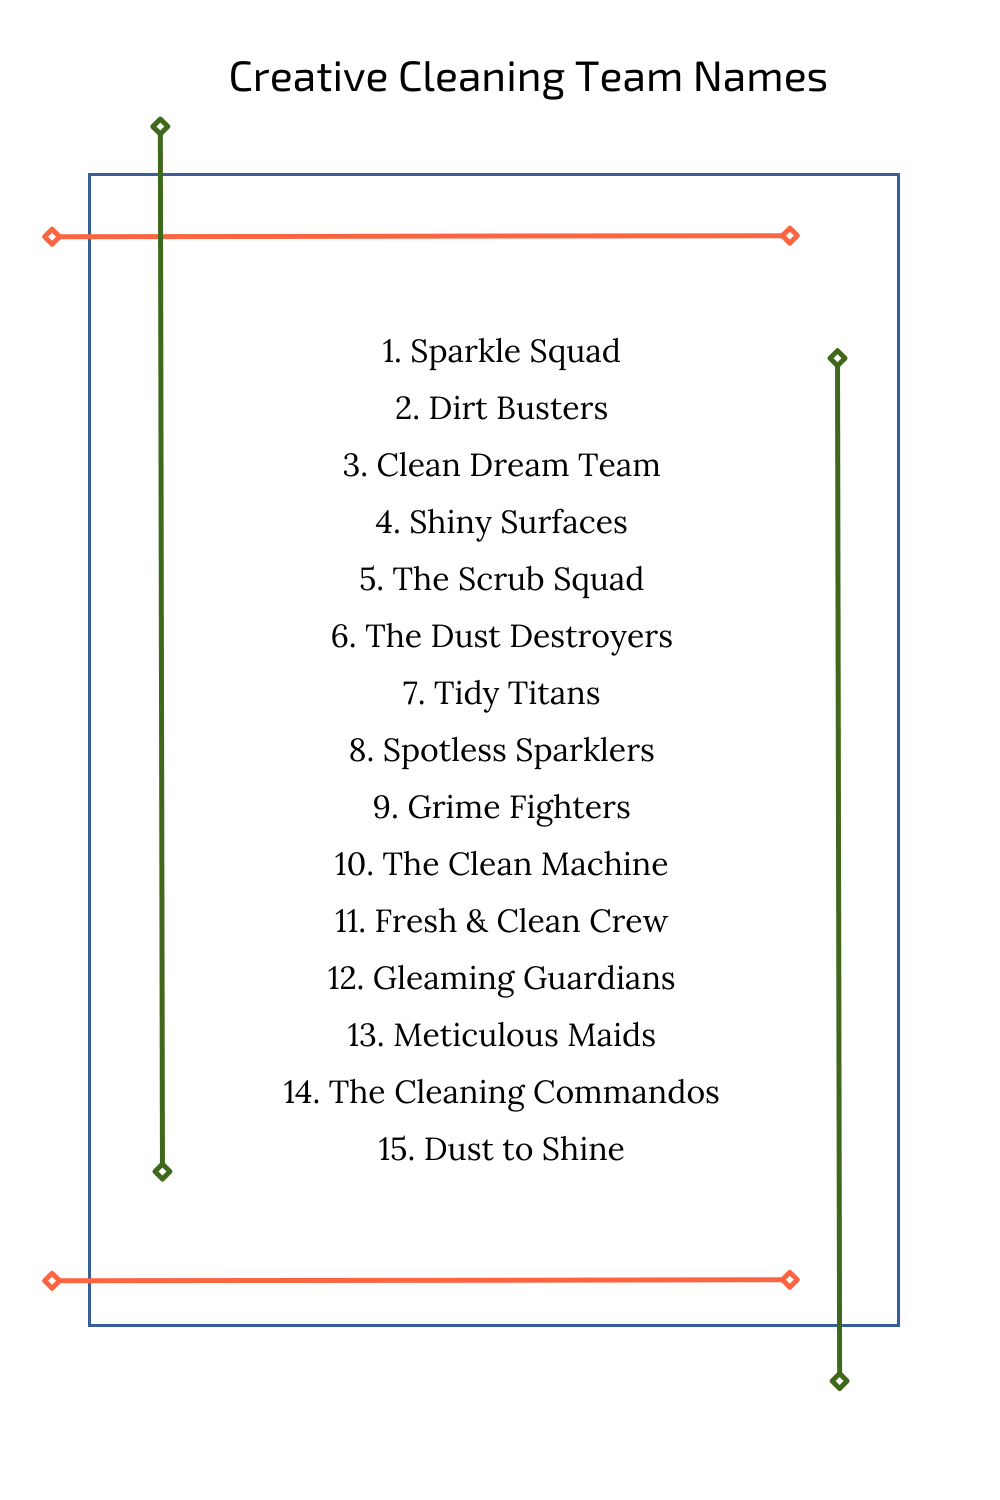 Creative Cleaning Team Names